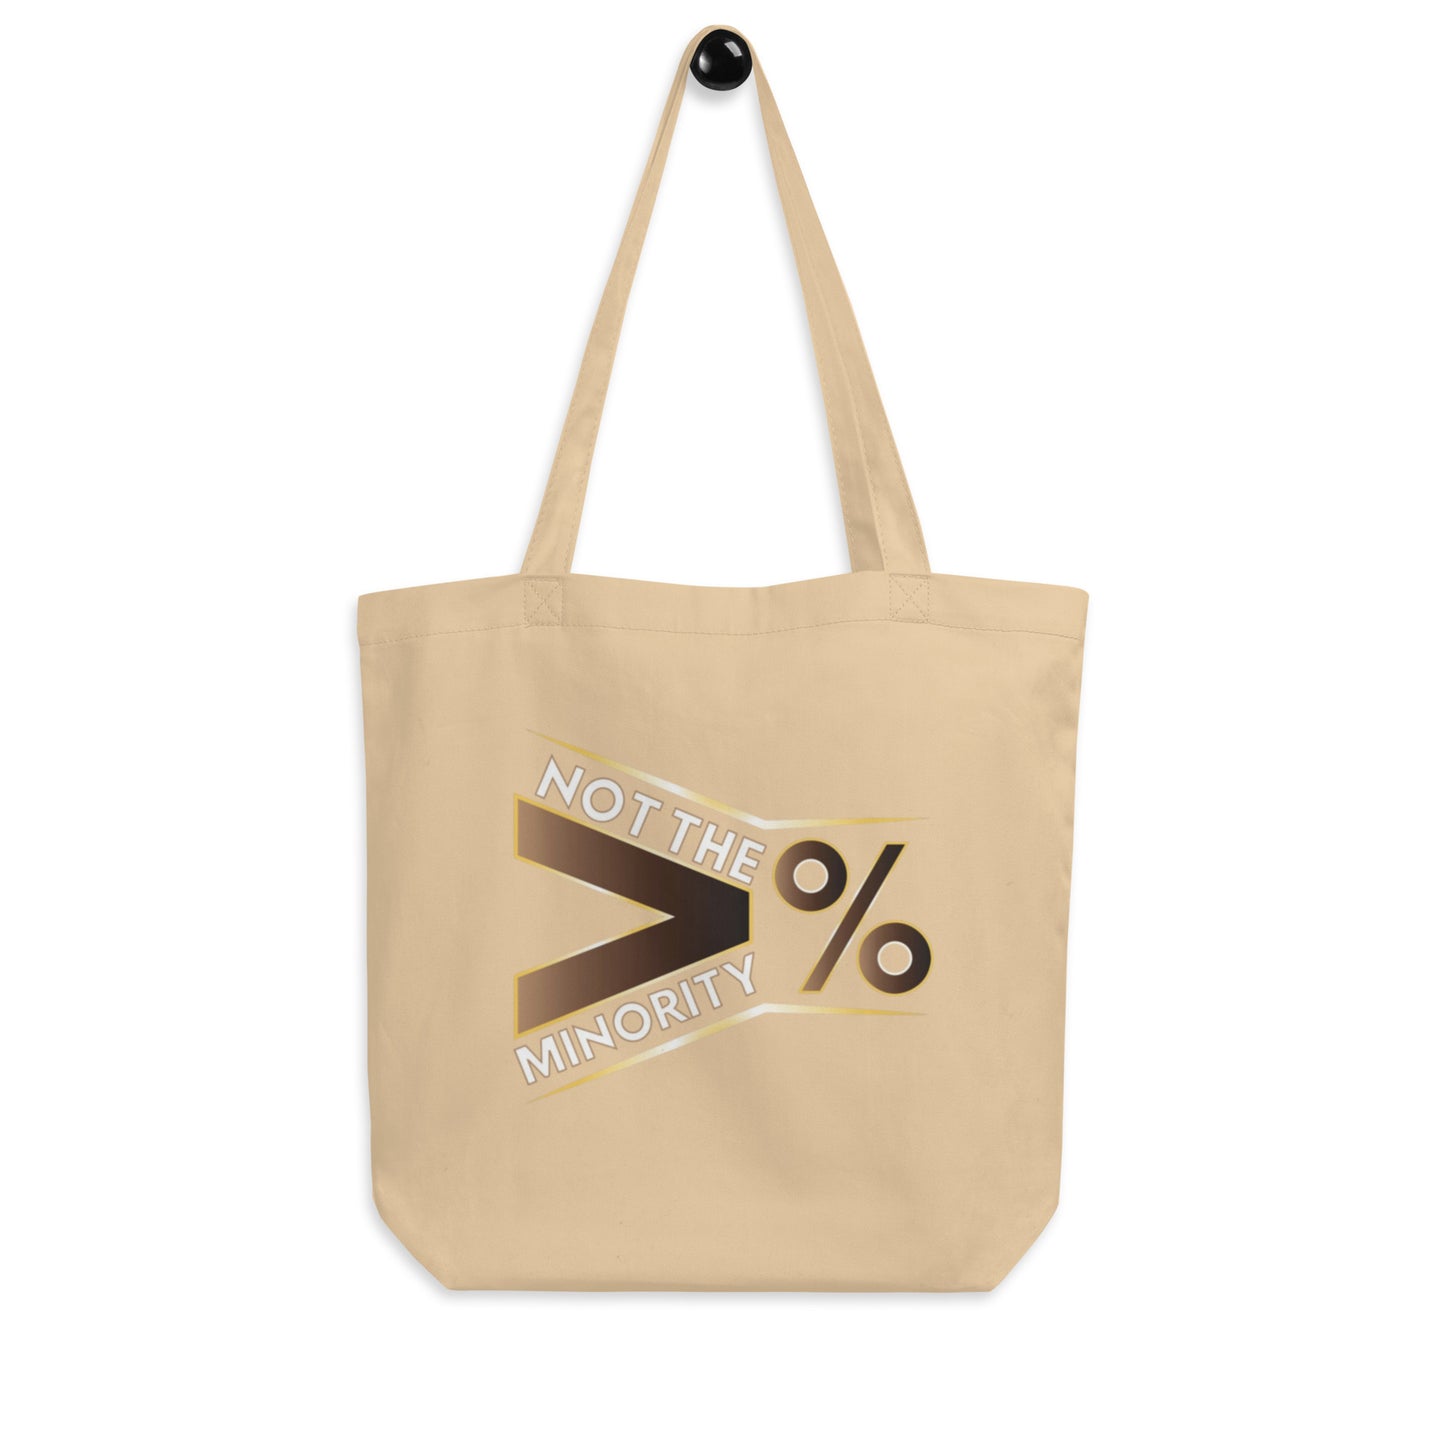 Greater than Eco Tote Bag